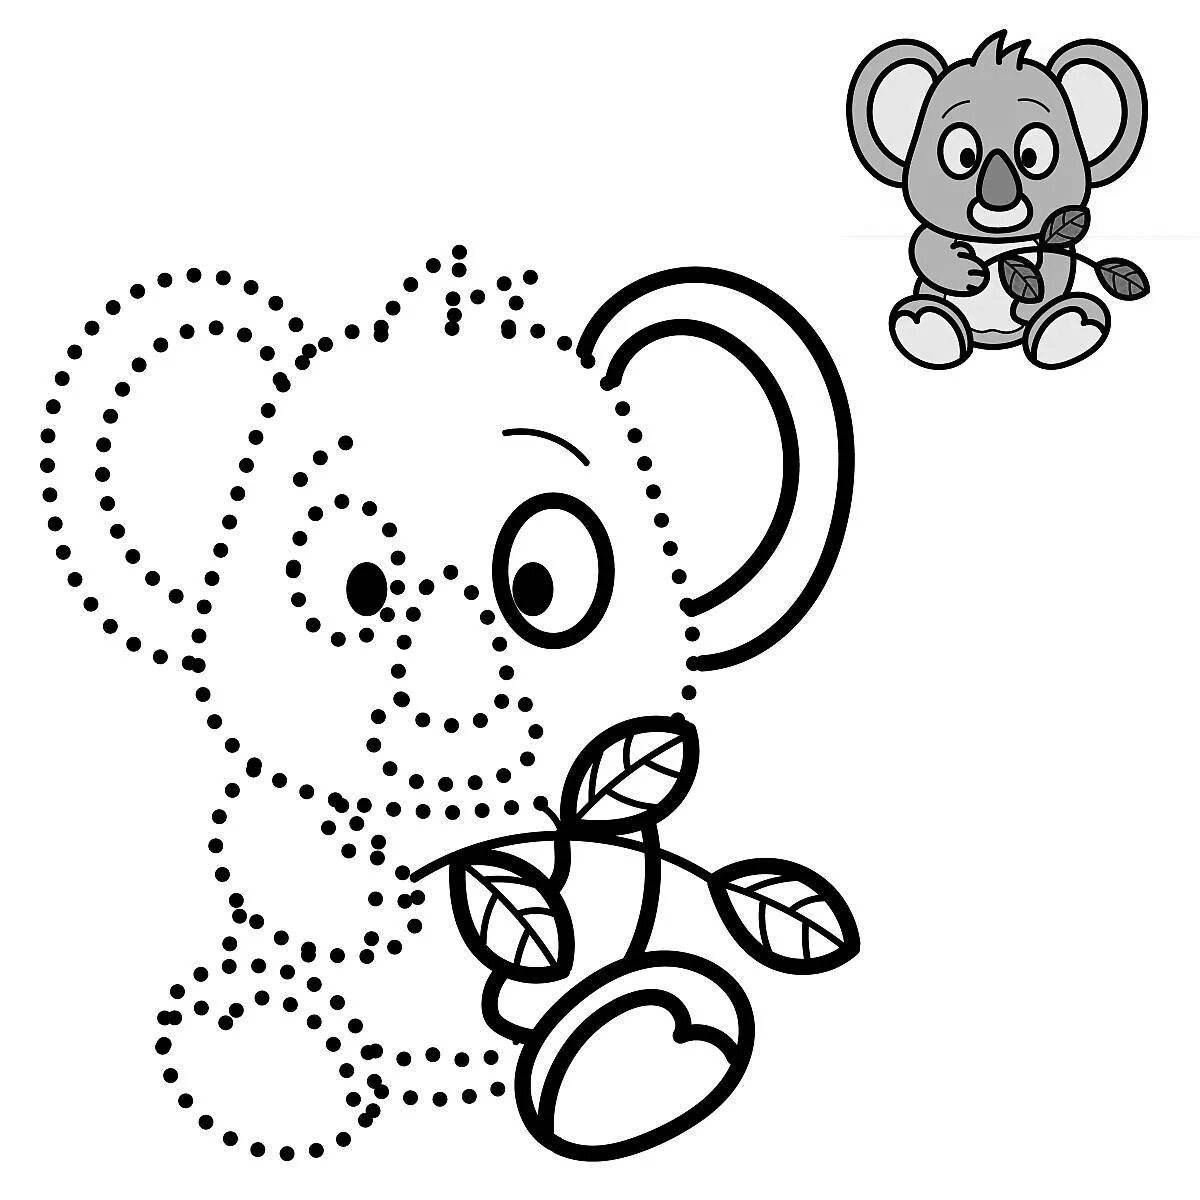 Colorful coloring dotty design for kids